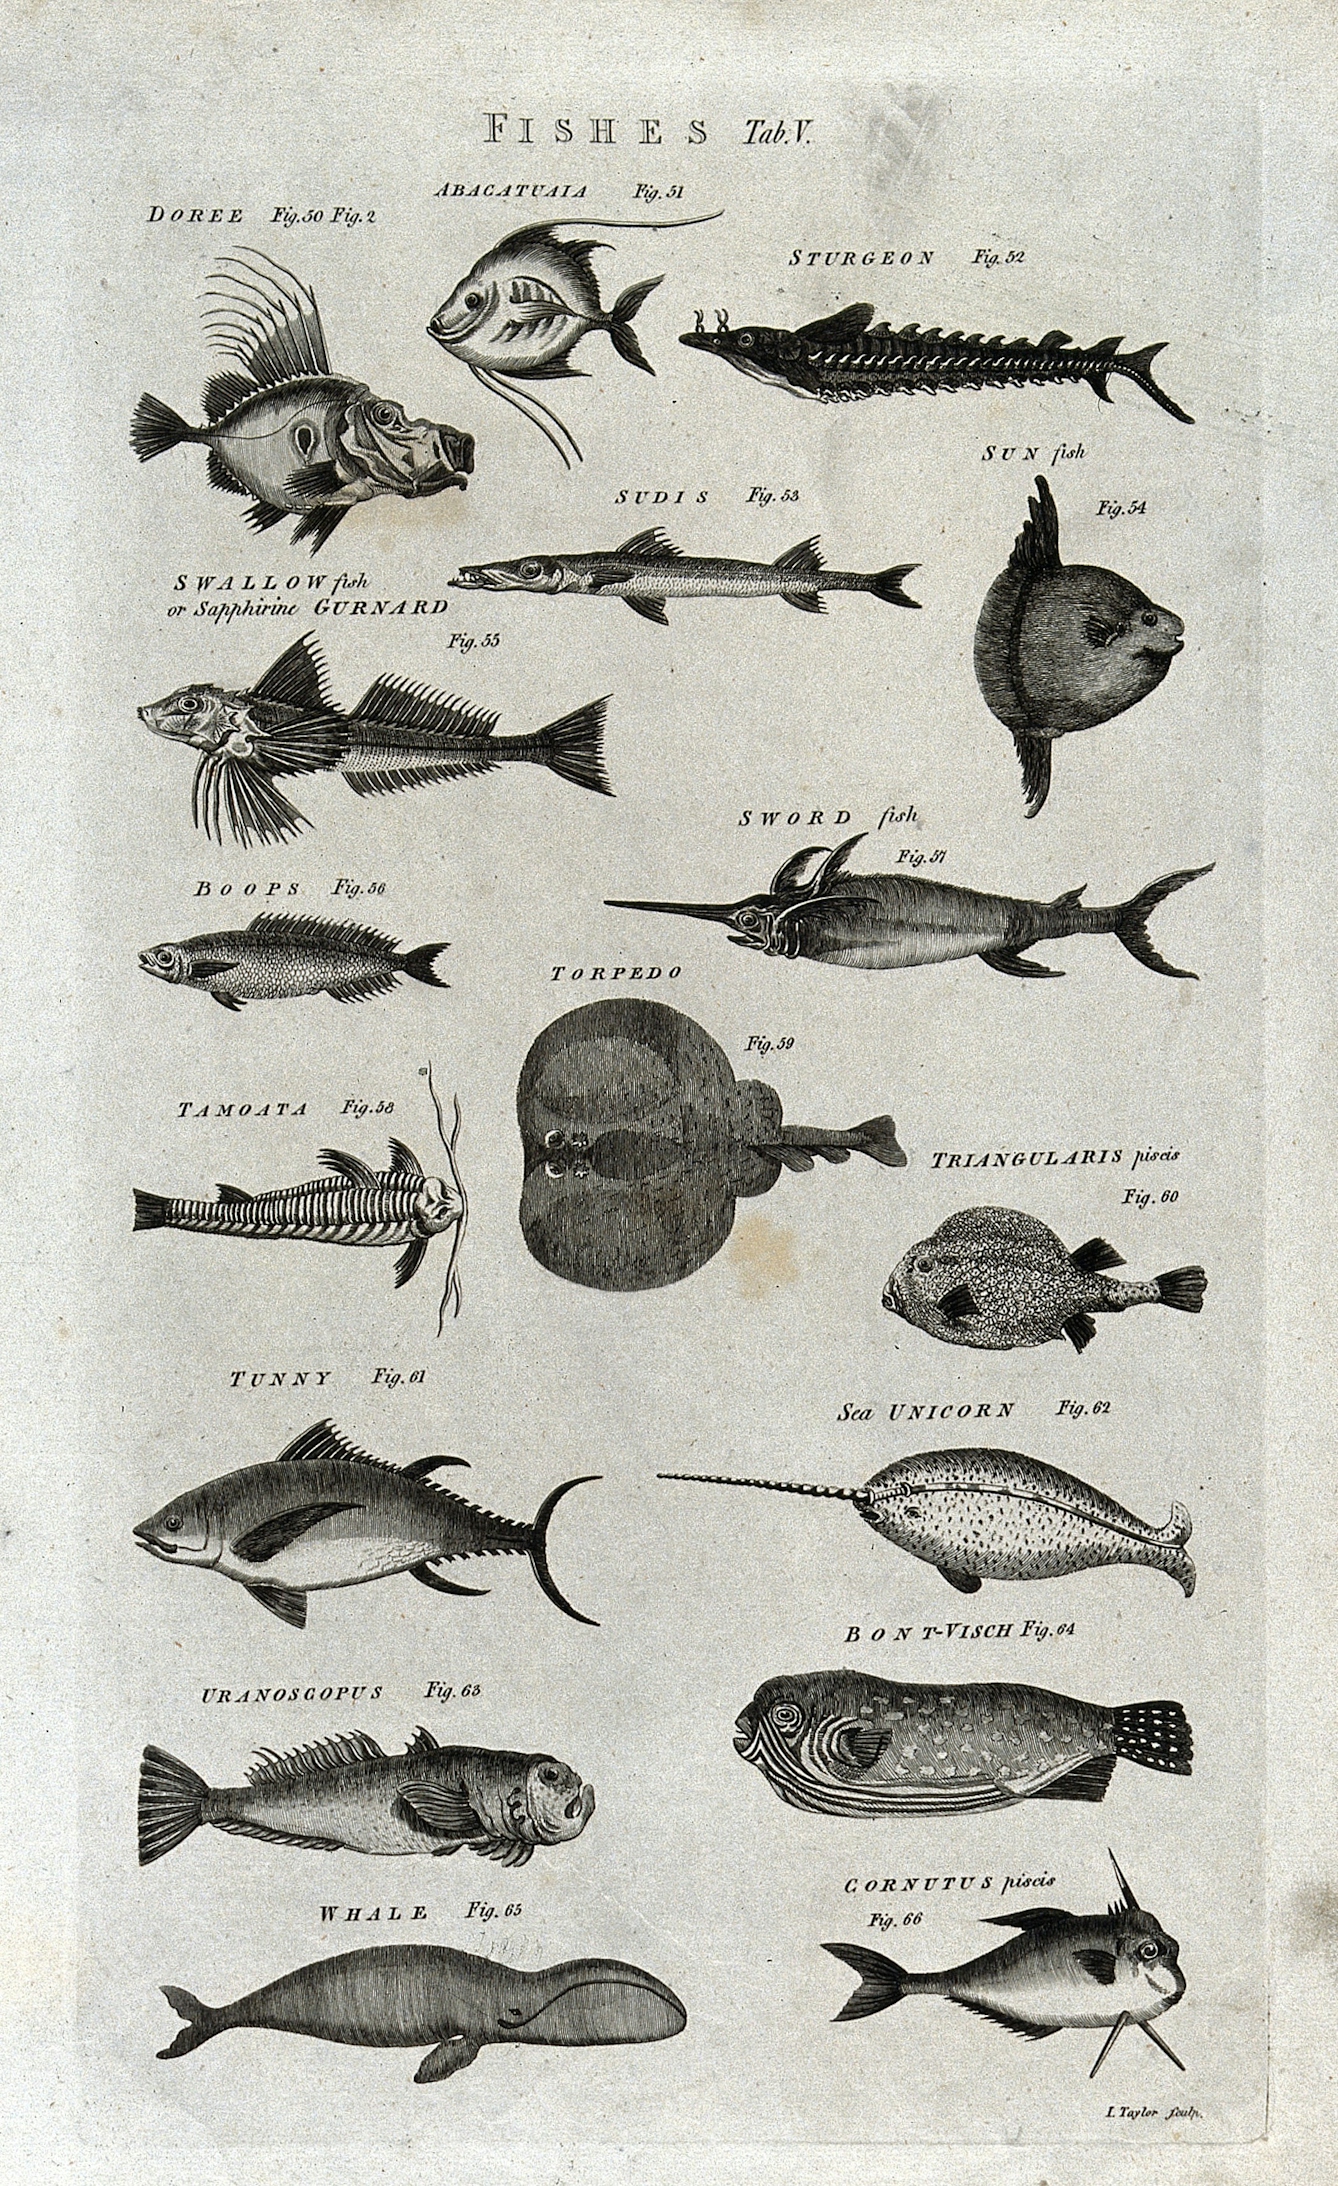 Seventeen fishes; including a sturgeon, sword fish, narwhal and whale. Engraving by I. Taylor.